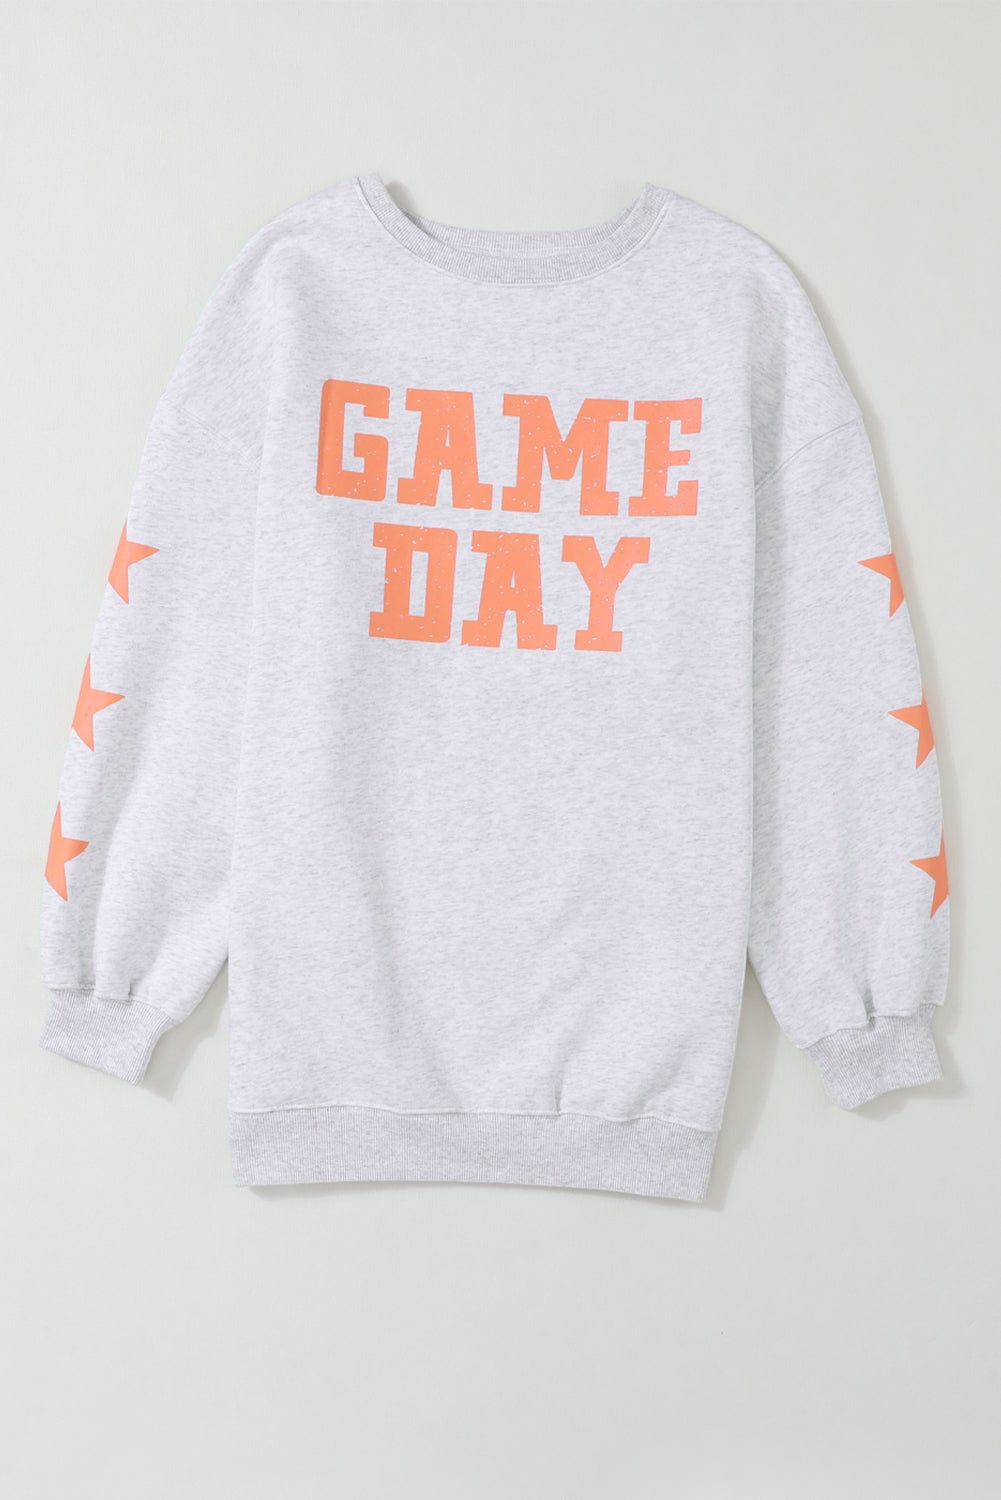 The802Gypsy  Tops Traveling Gypsy Jake Game Day Graphic Sweatshirt